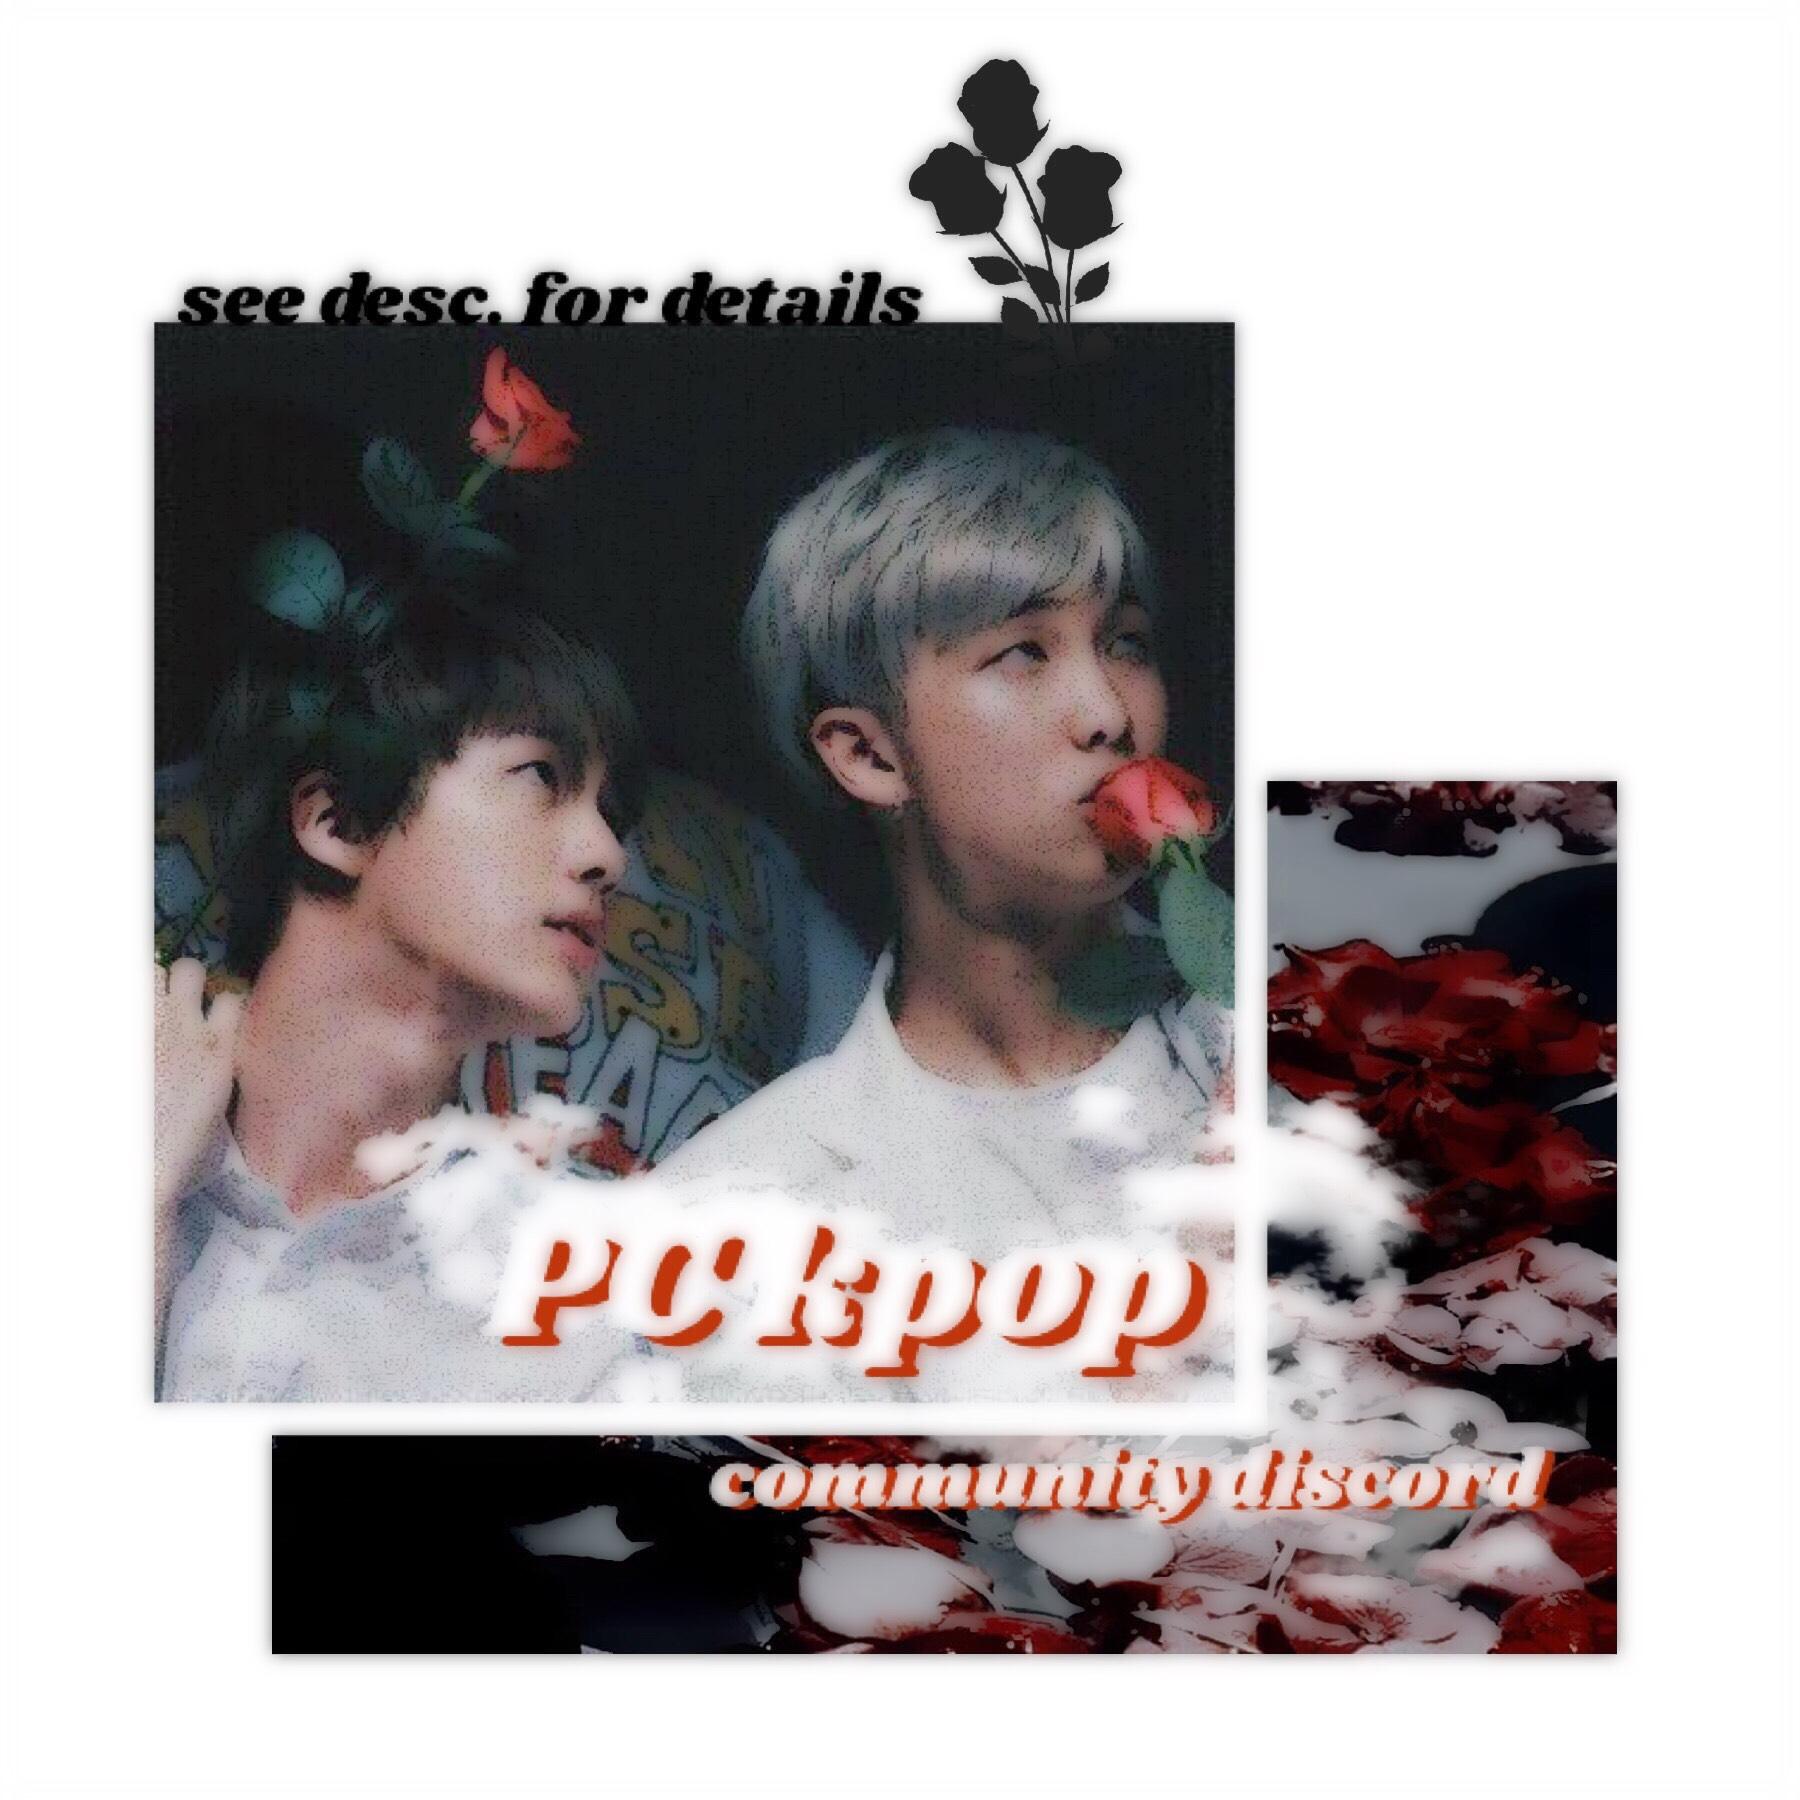 After hours of preparation, me and @iiLittleSamuraiii have built a Kpop PC Discord so this community has another place to interact. We’d really appreciate it if you dropped by, even if you’re not a k-boi🌸 Link in account description, cya there